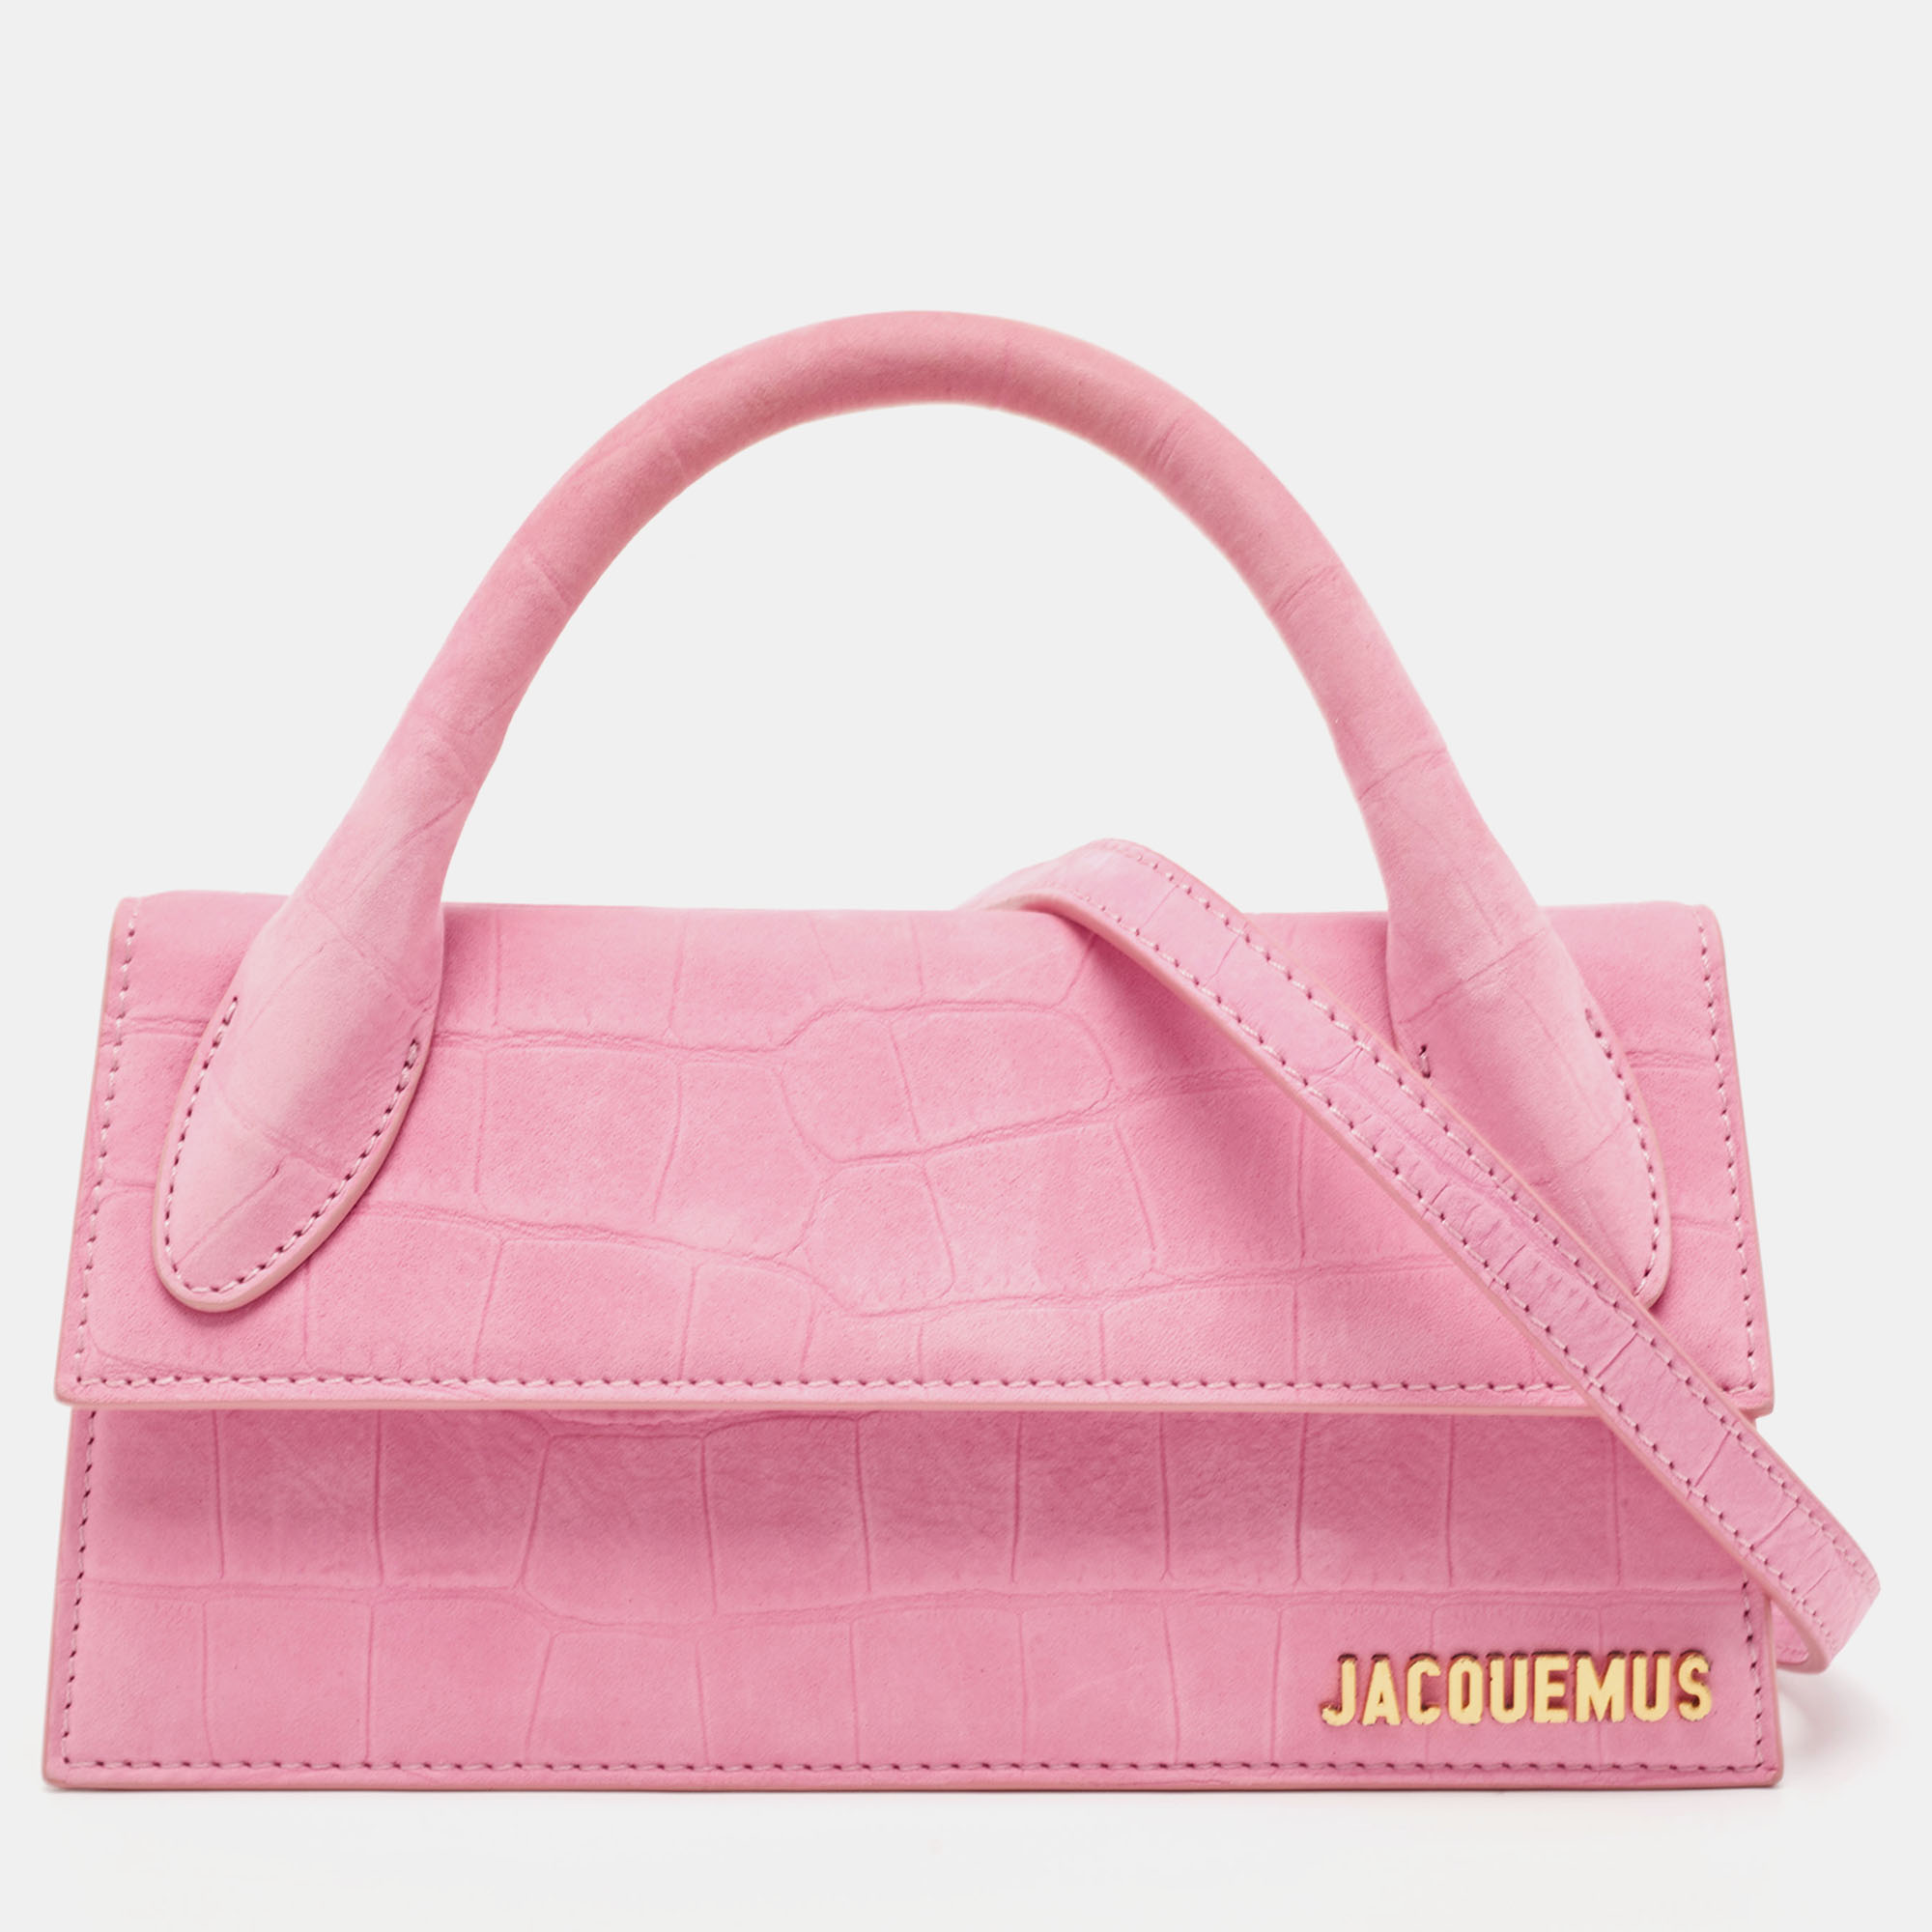 Jacquemus Light Pink Croc Embossed Nubuck Leather Long Le Chiquito Top Handle Bag